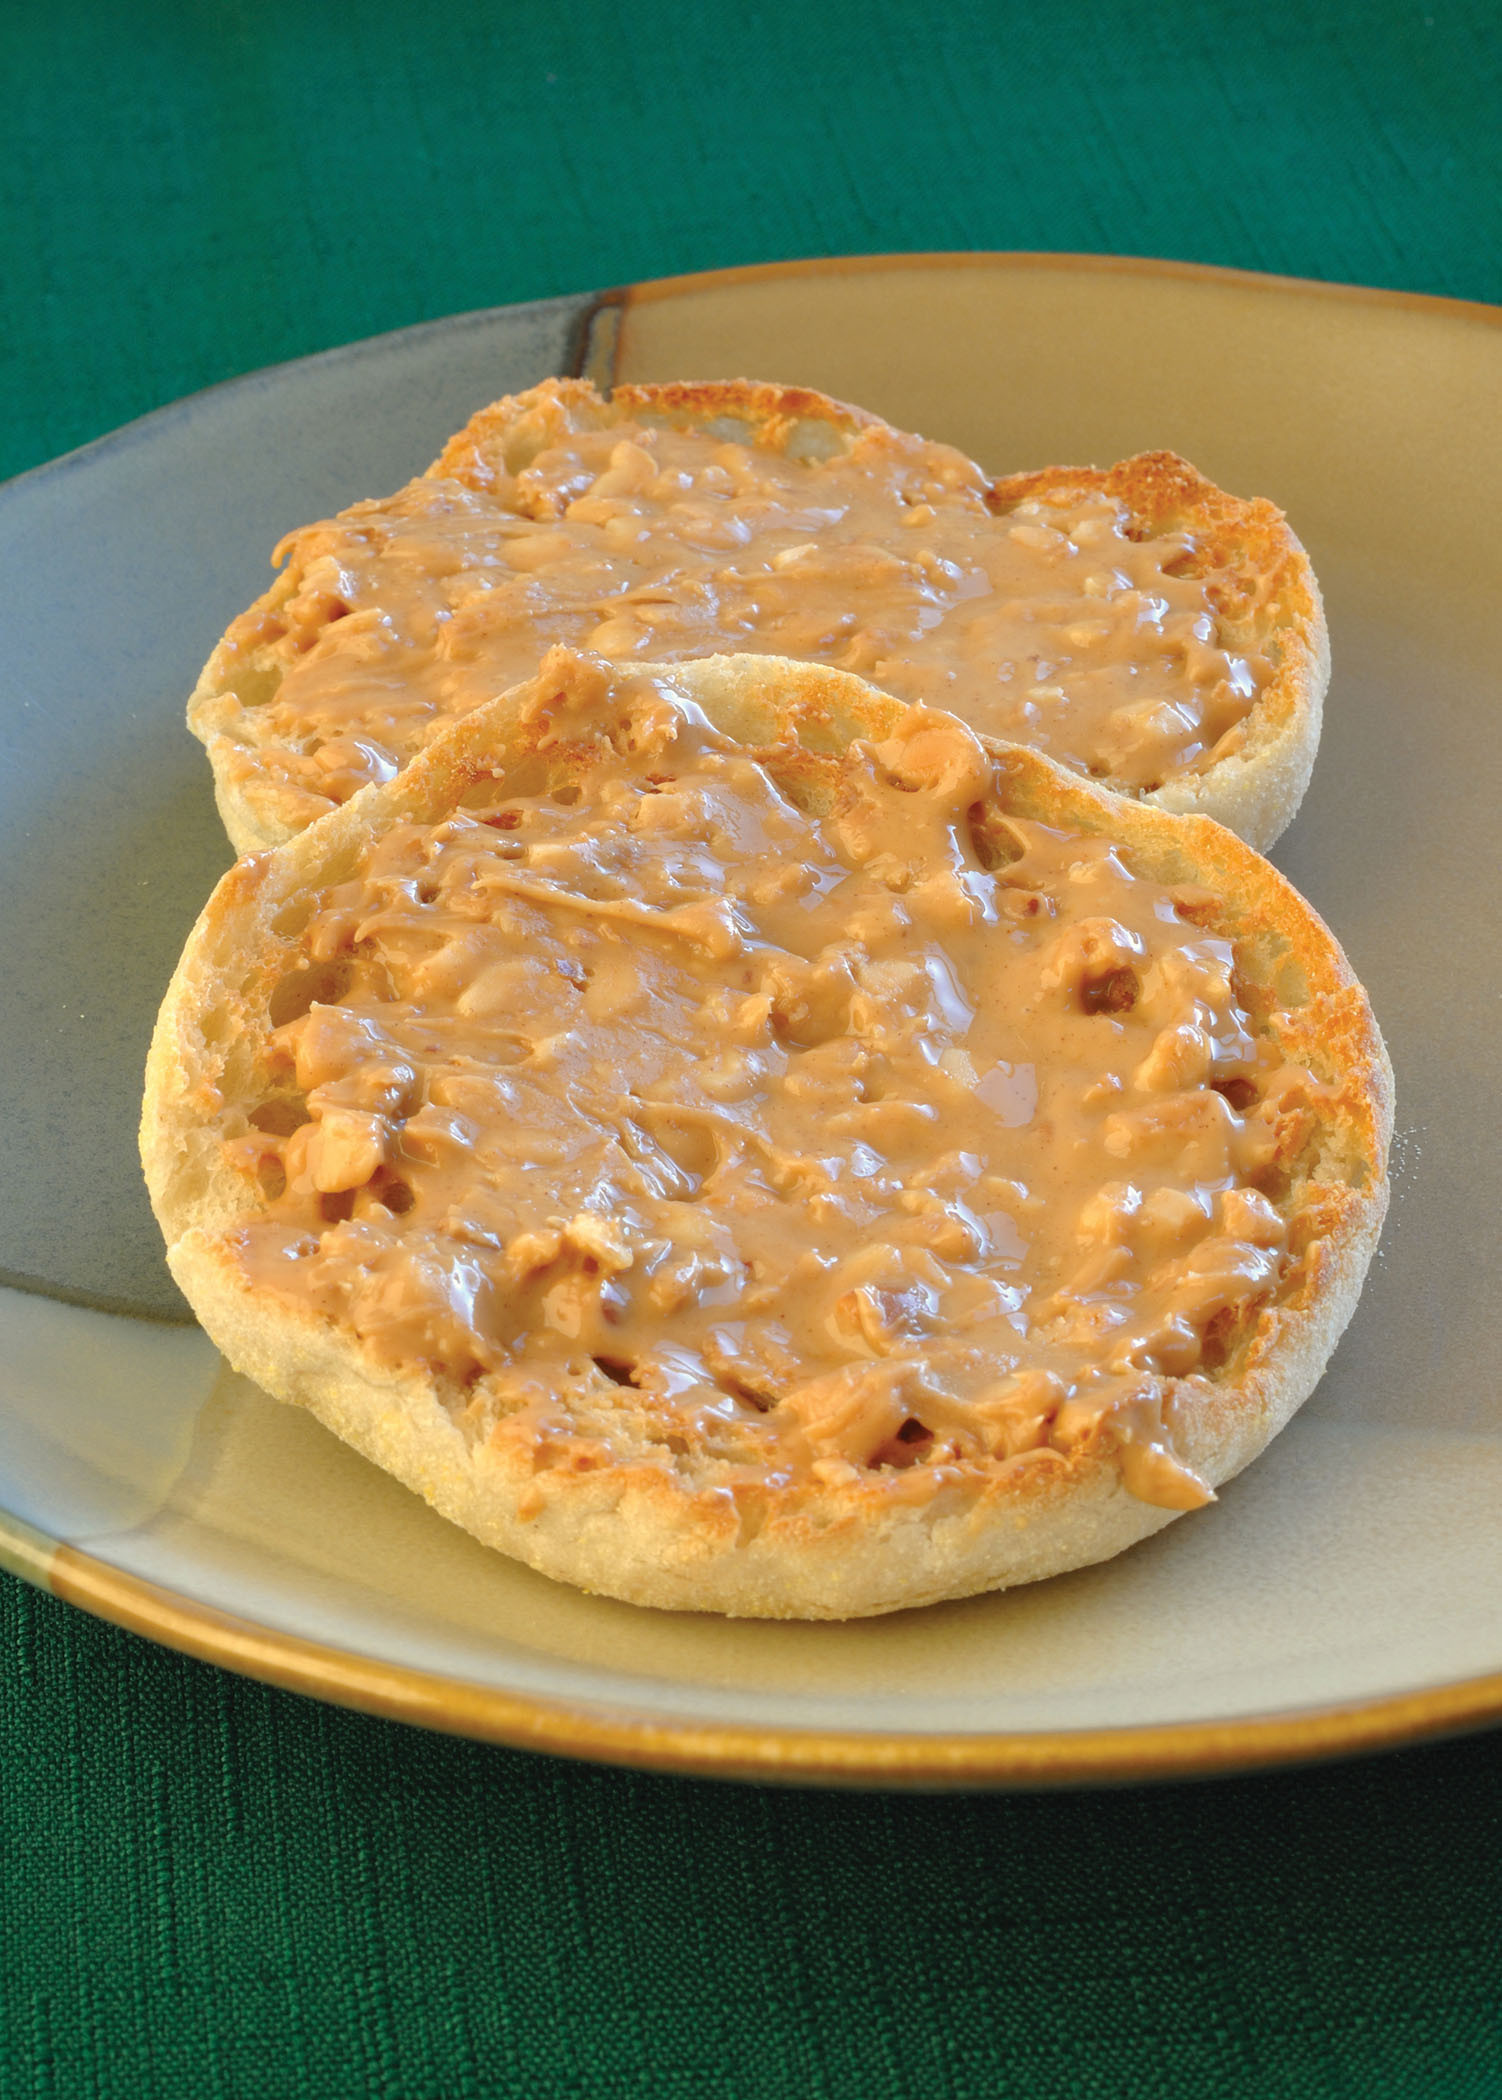 photo of an english muffin with peanut butter spread on it